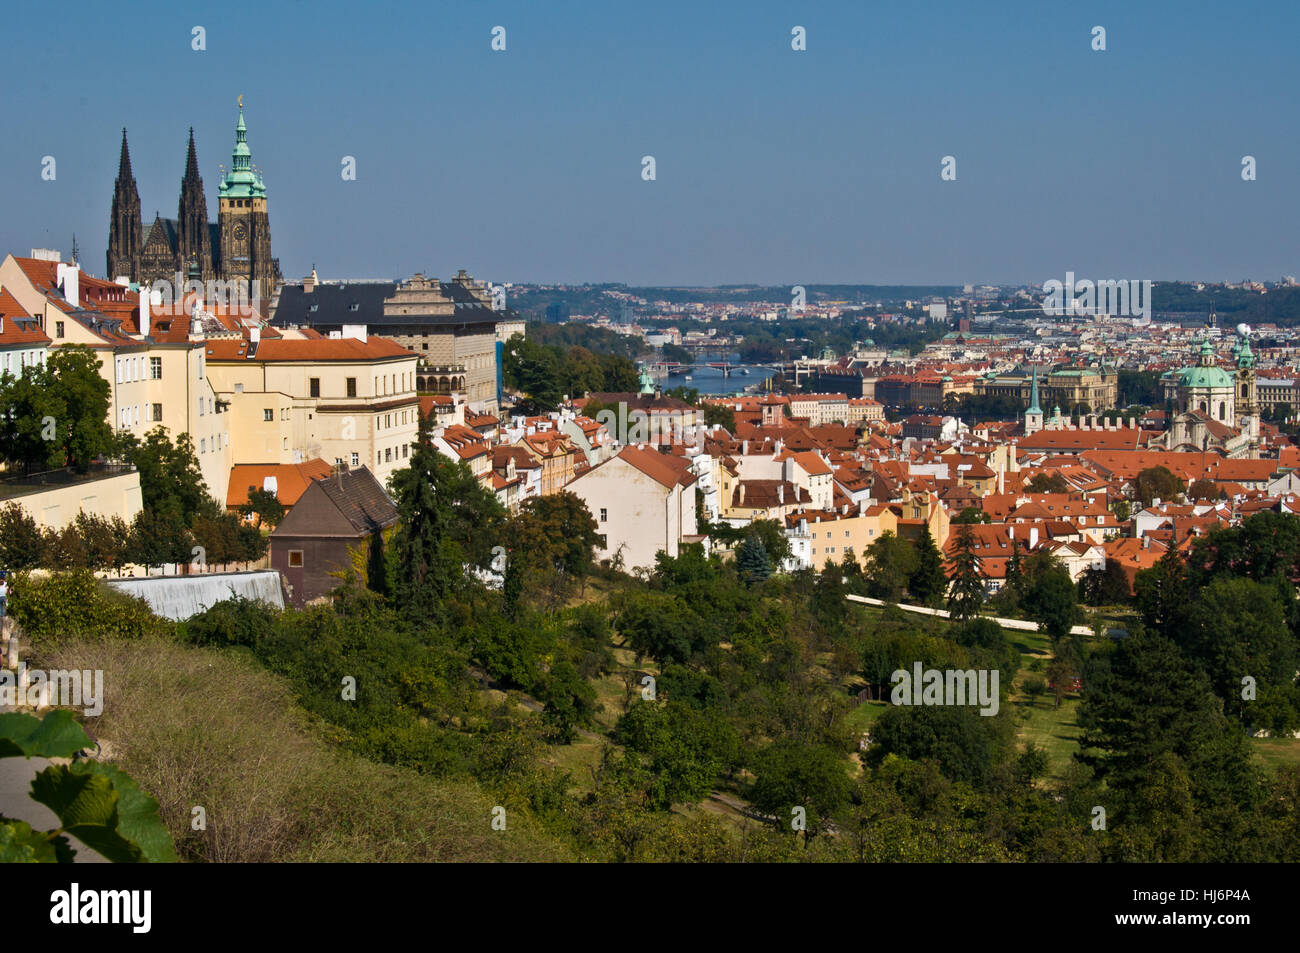 travel, city, town, culture, cathedral, europe, prague, traditional, sight, Stock Photo